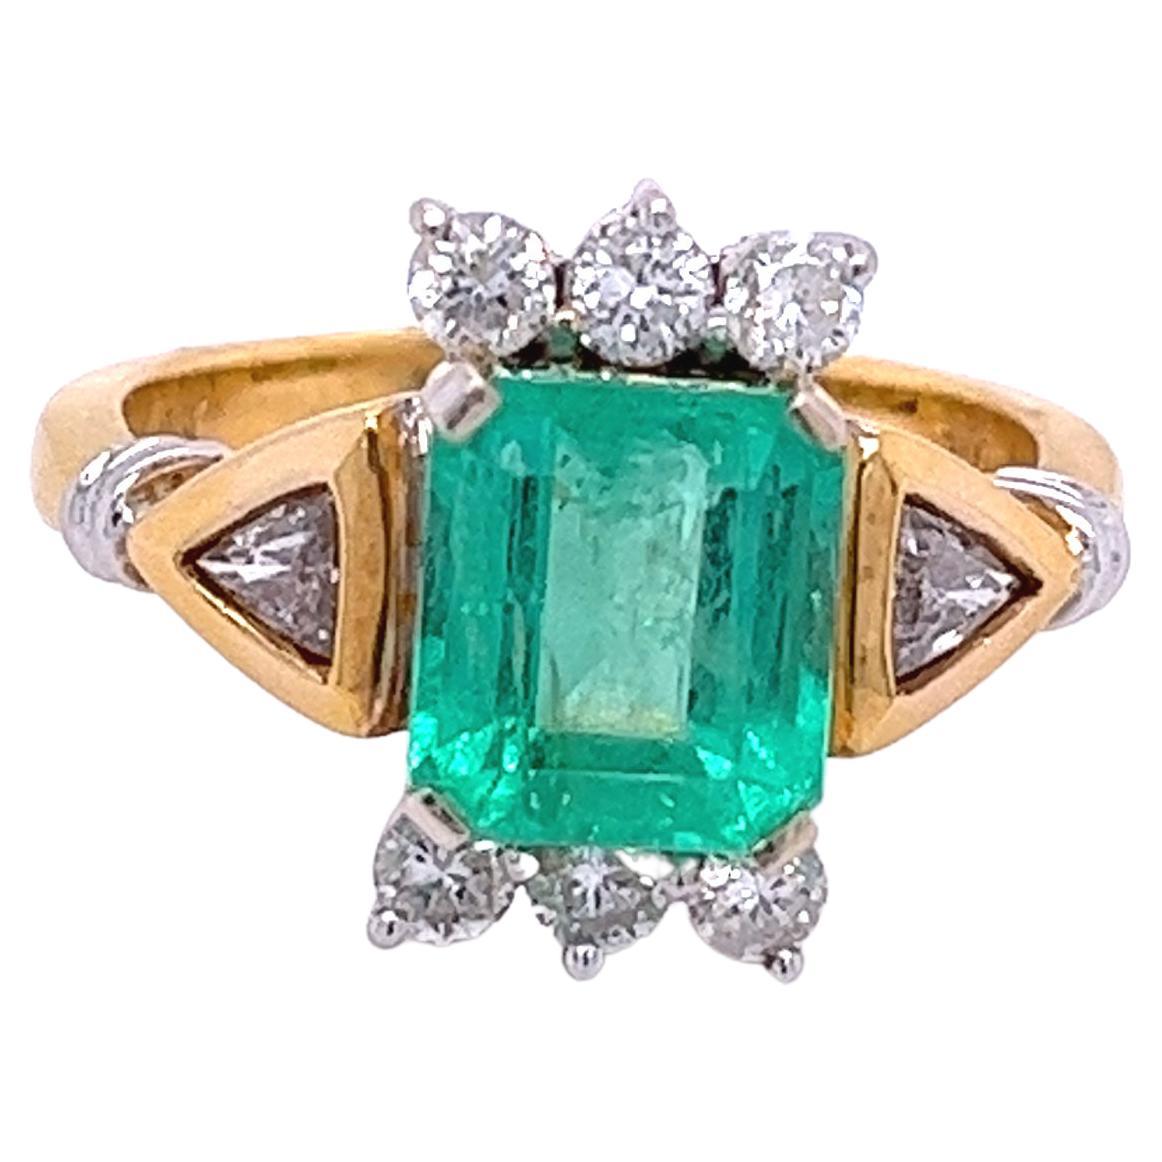 2.77 Carat Colombian Emerald and Trillion Cut Diamonds in 18k Yellow Gold Ring For Sale